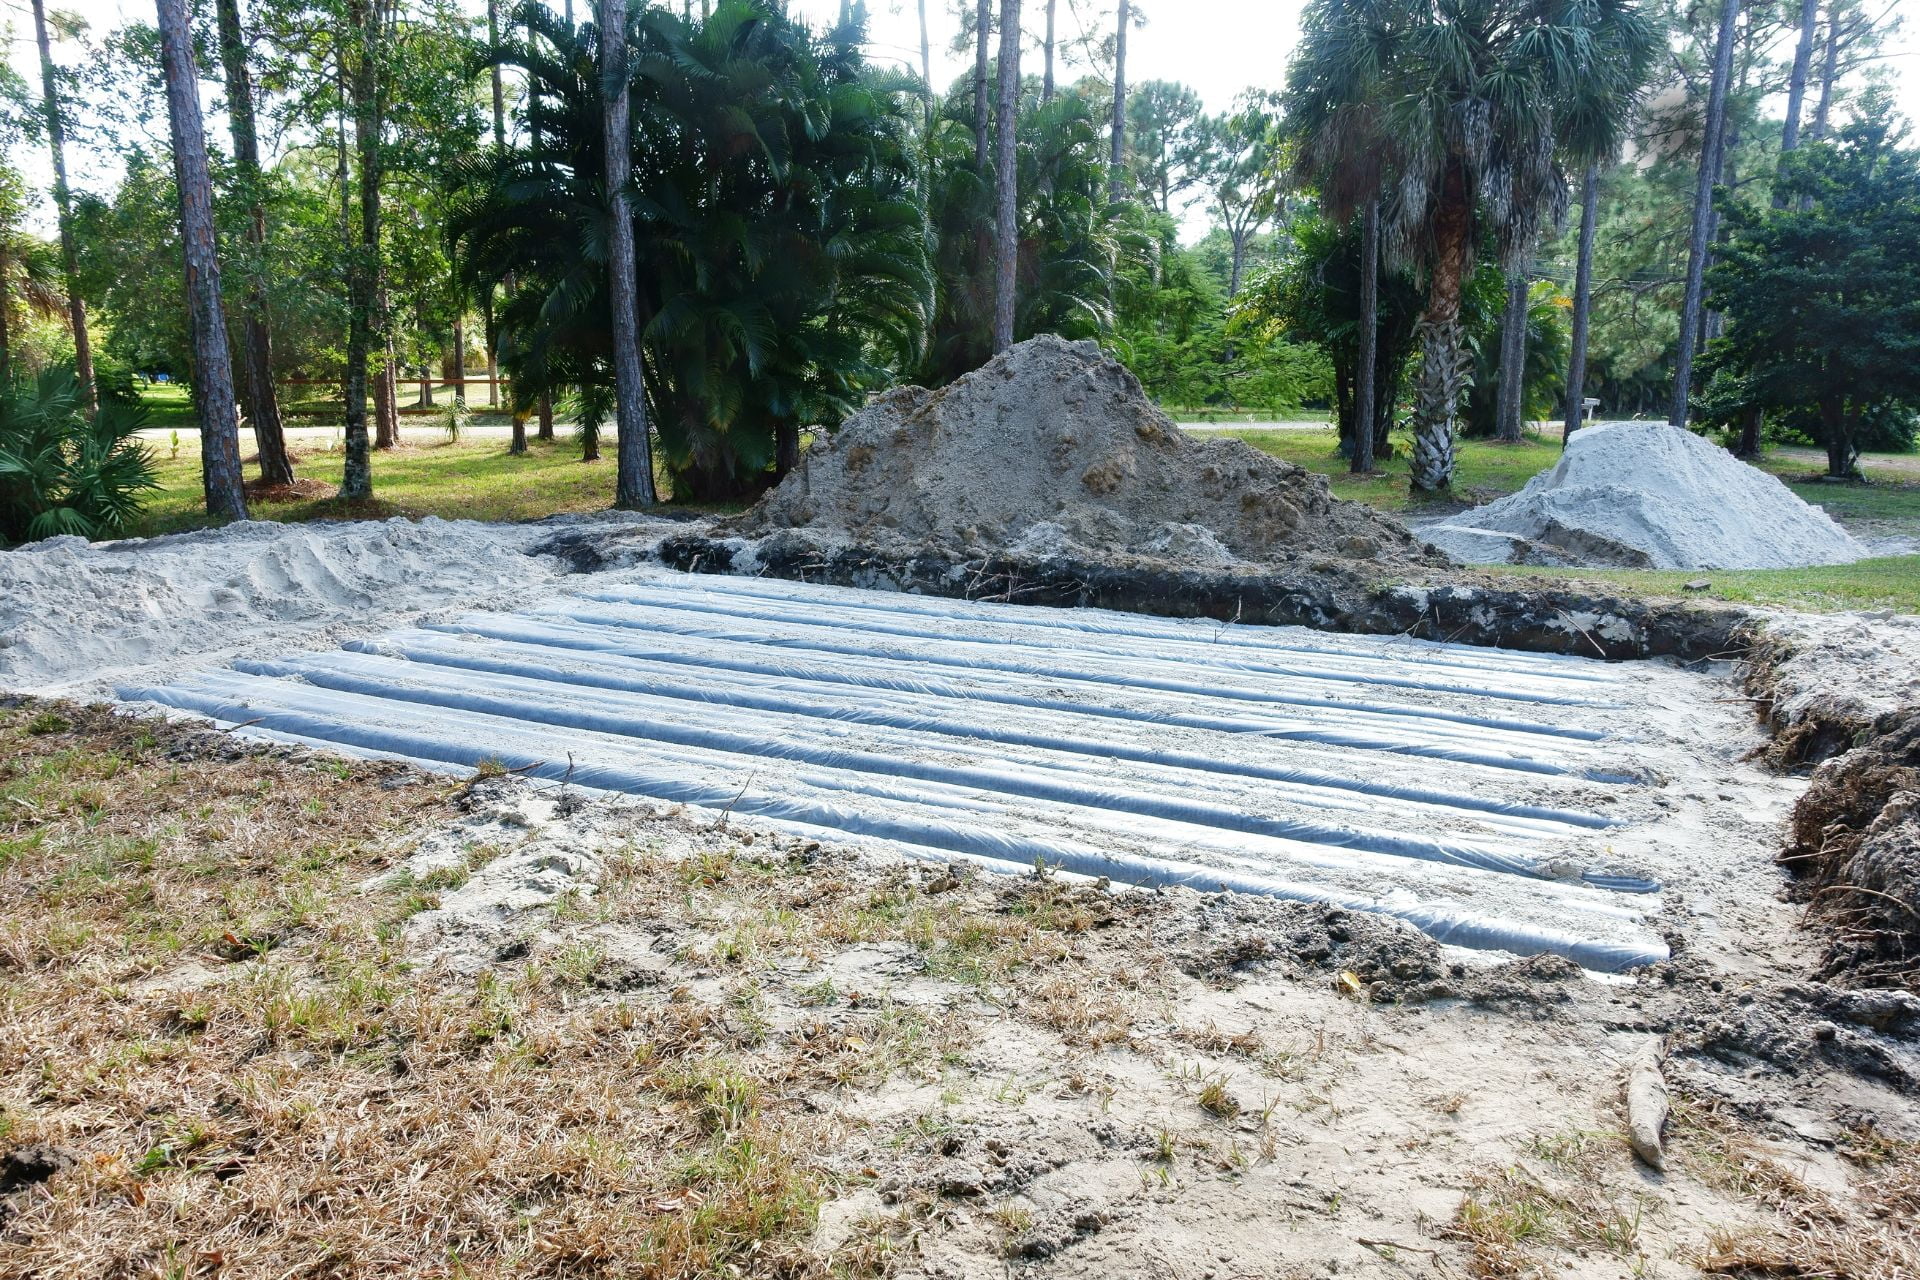 A maintenance pile of sand and gravel in a yard for drain field purposes.